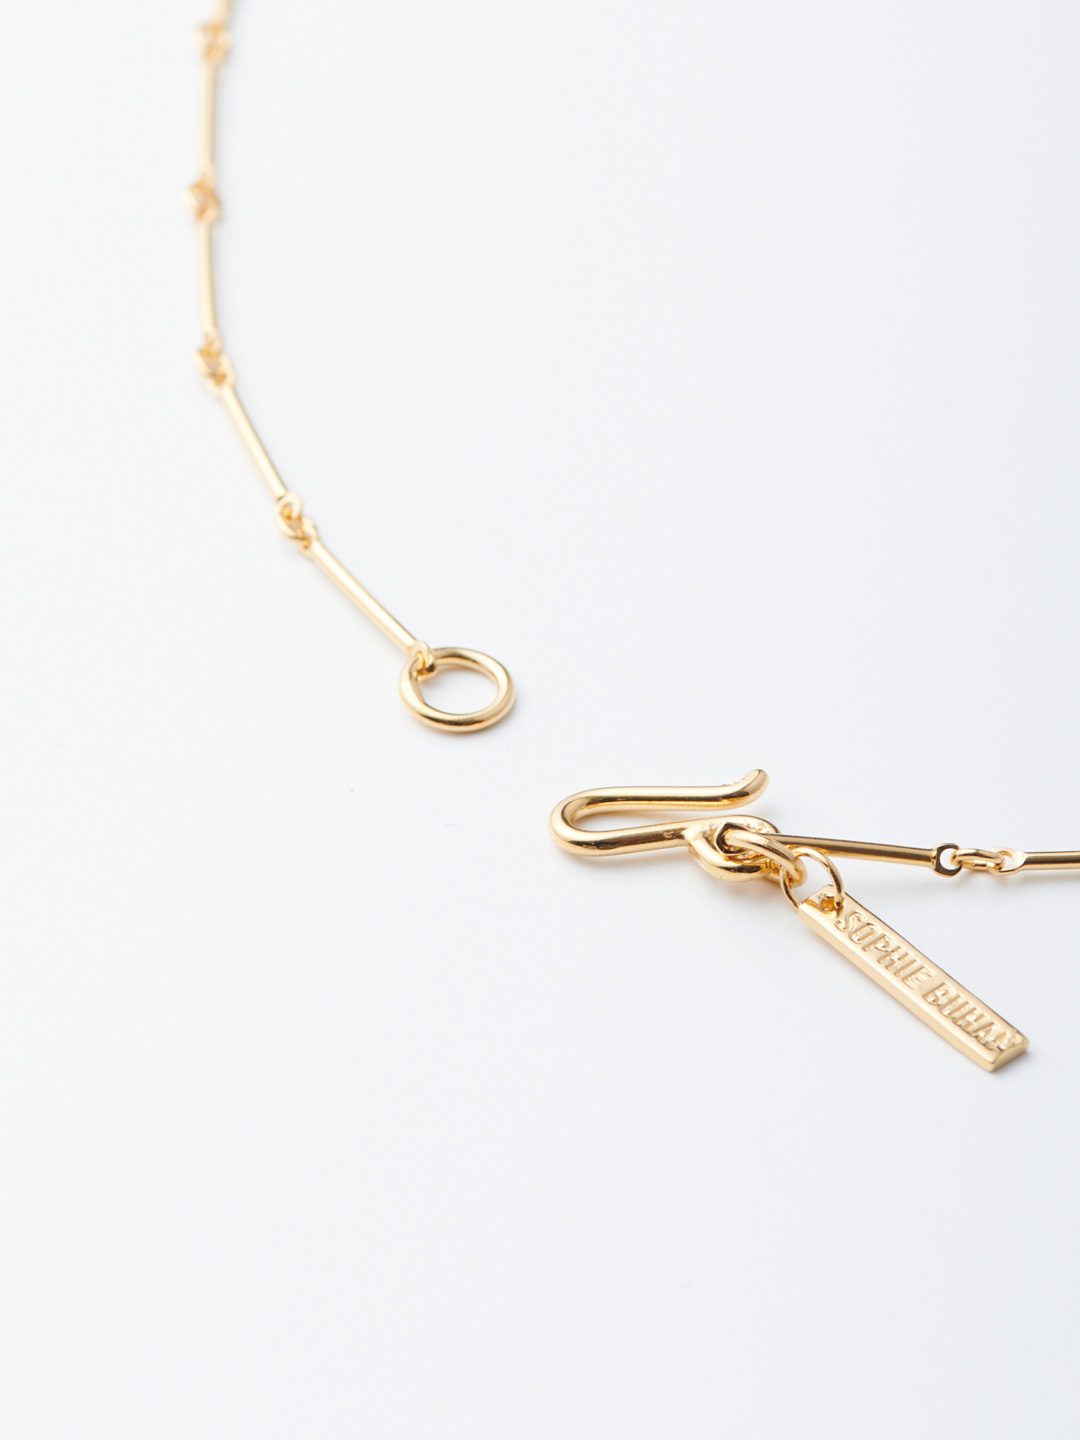 Bar Chain Necklace / 50cm - Gold